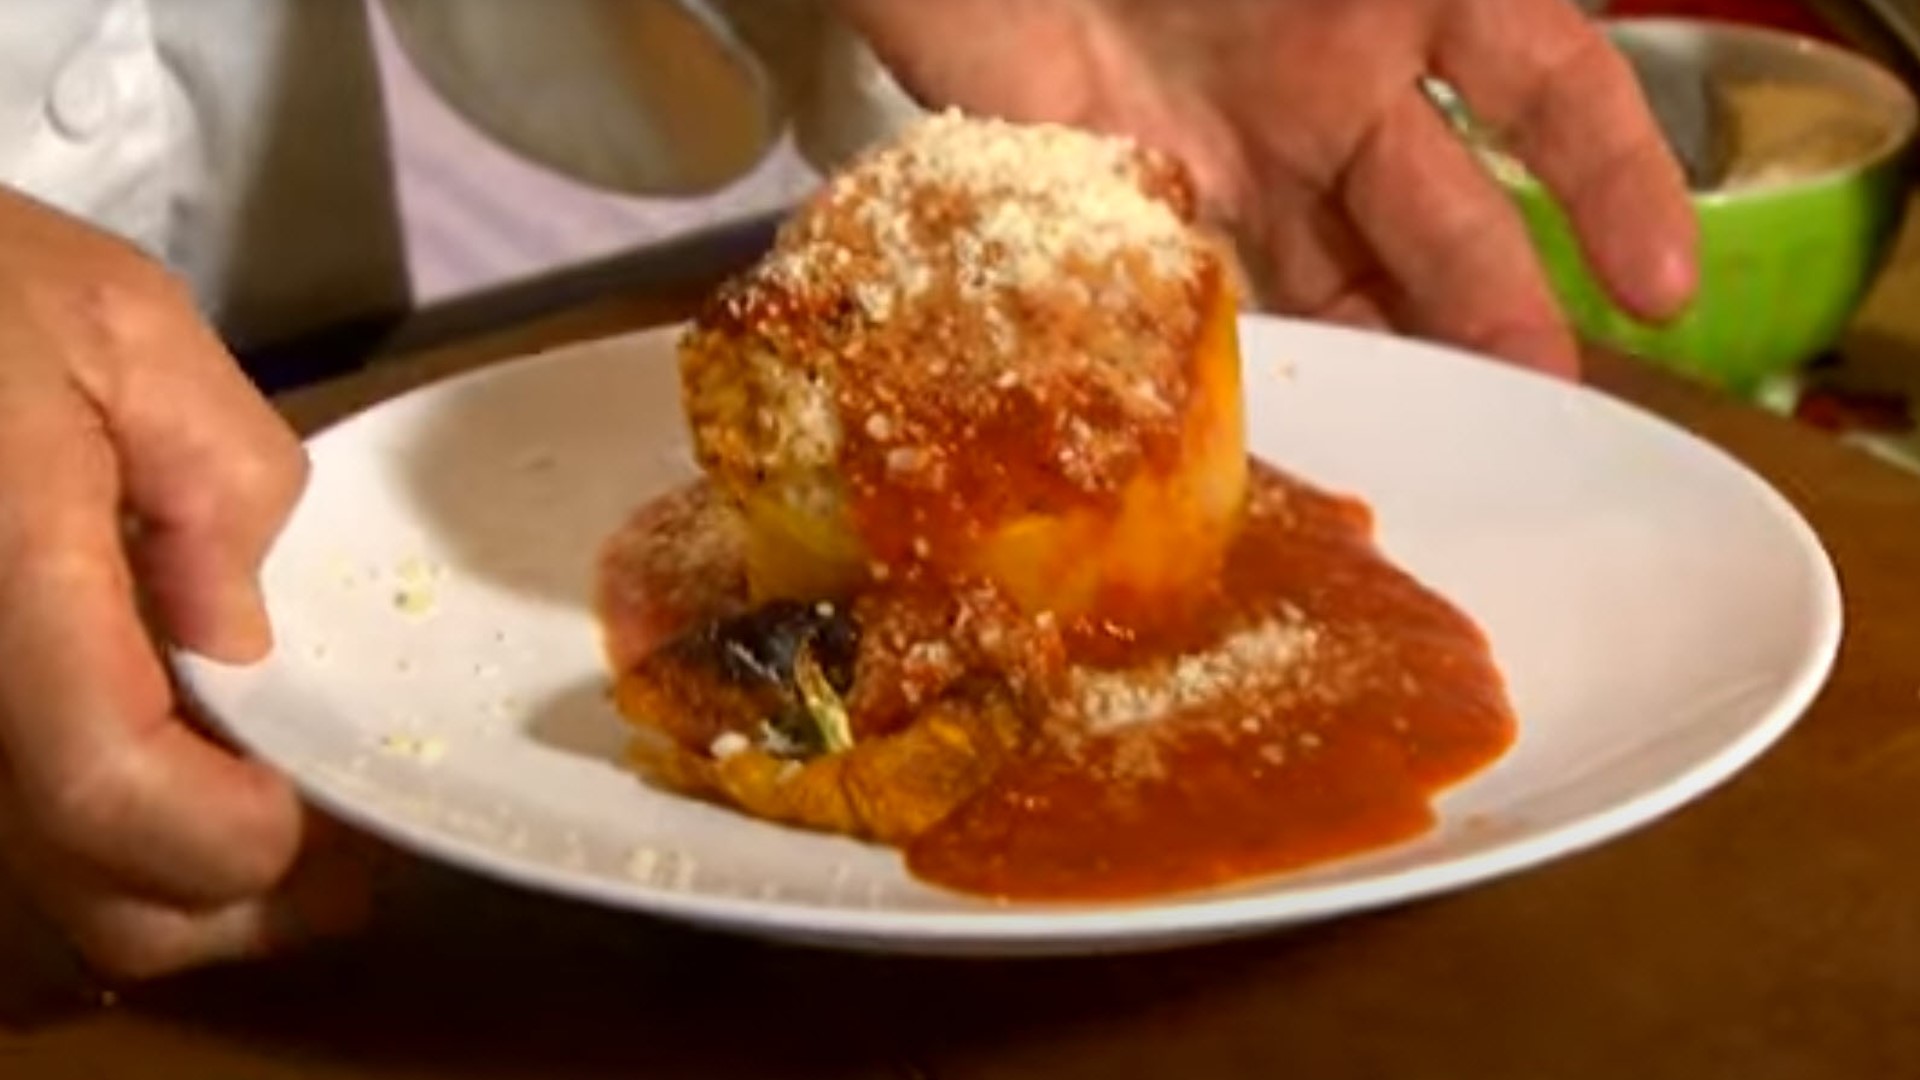 Stuffed peppers recipe from CBS 8's Shawn Styles